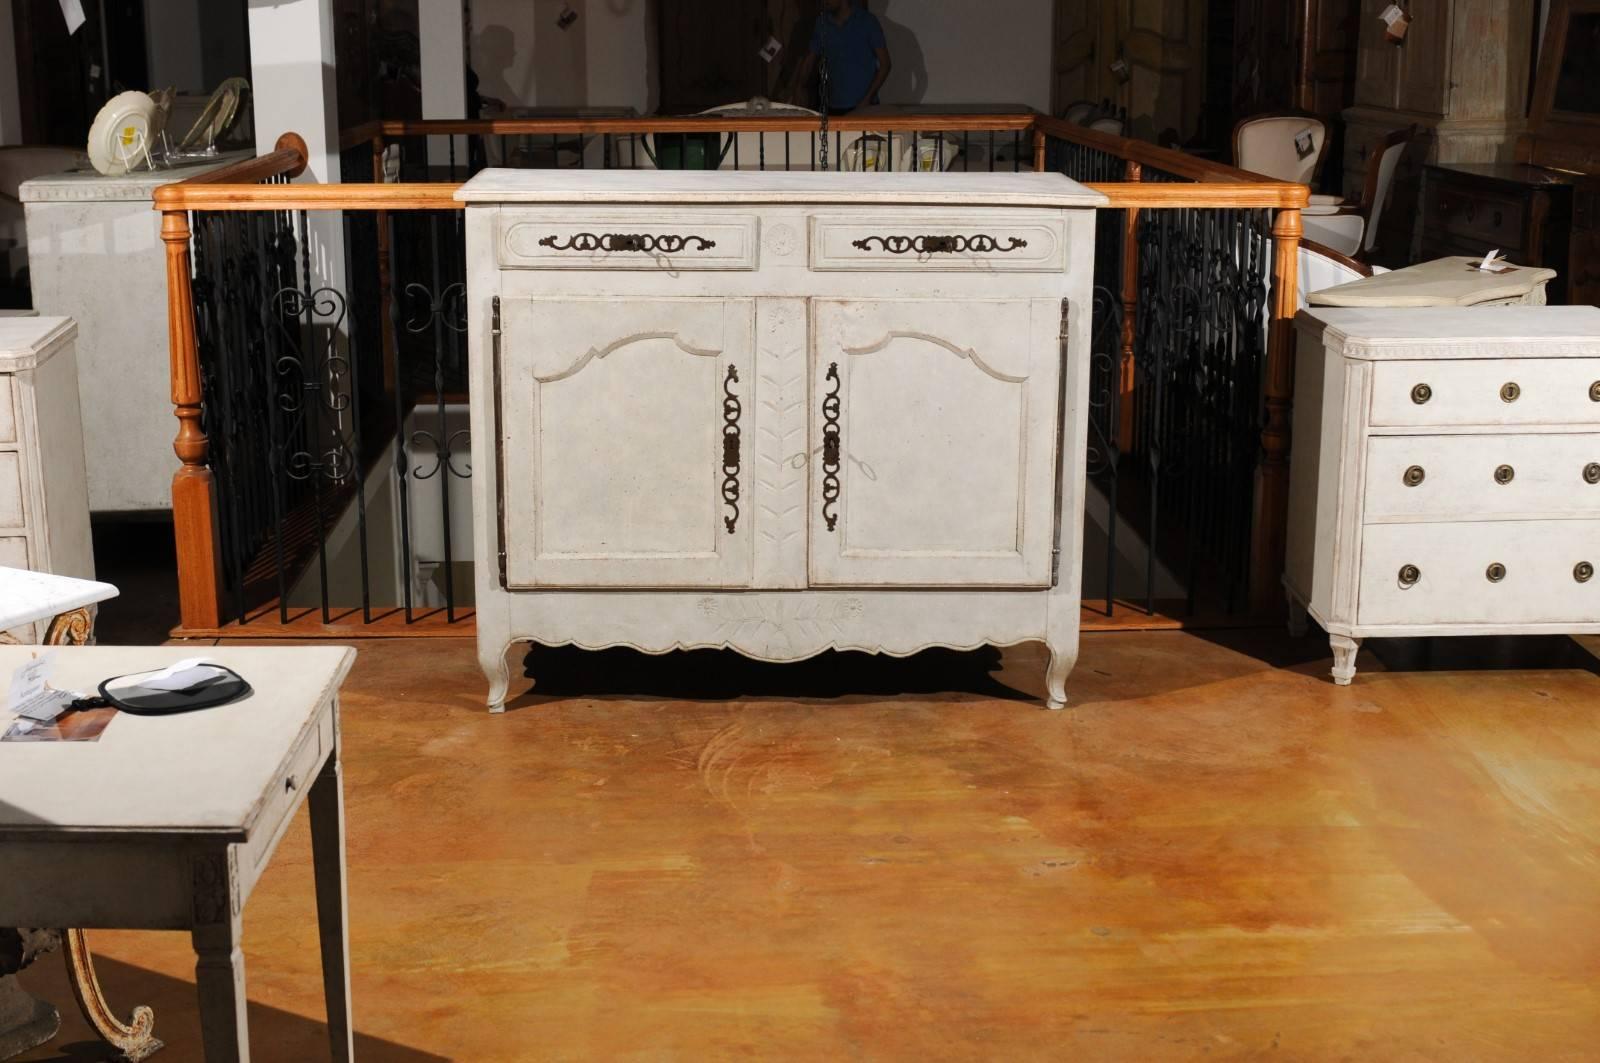 A French Louis XV period painted wood buffet from the mid-18th century, with two drawers over two doors and scalloped skirt. This French painted buffet features a rectangular, slightly raised top, sitting above two drawers. Each drawer is adorned